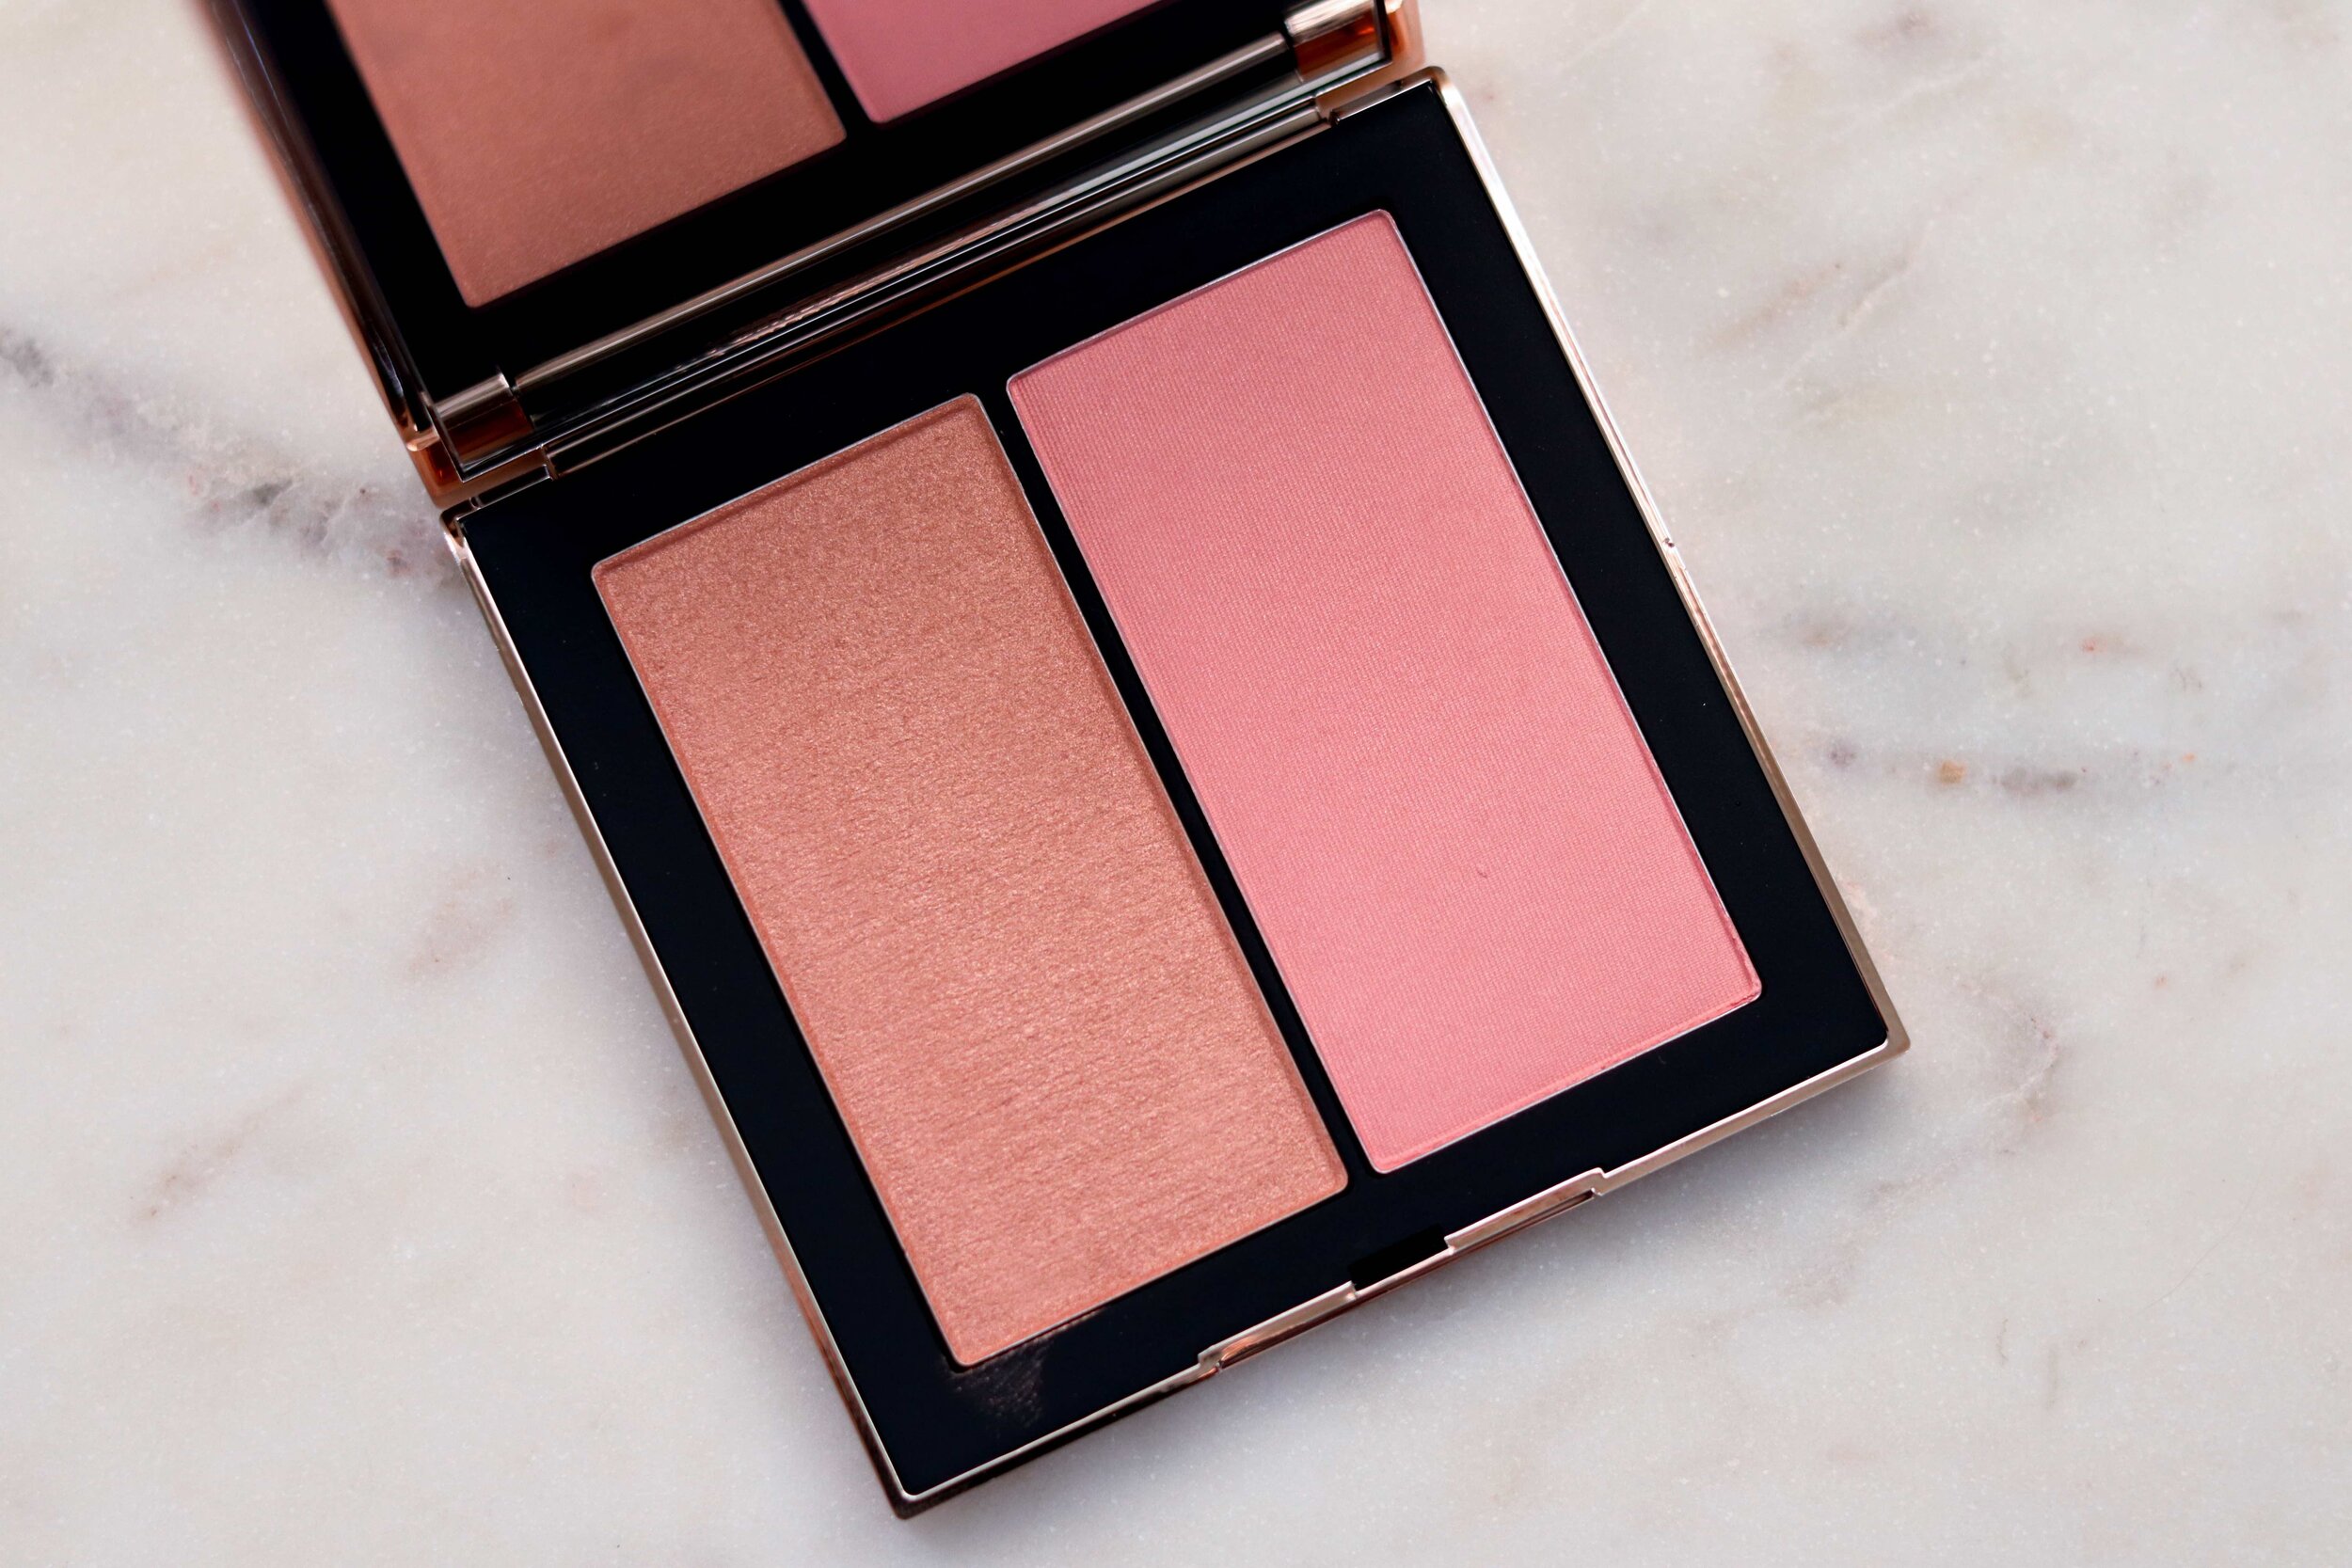 Shades of desire: A close look into the NARS Uninhibited